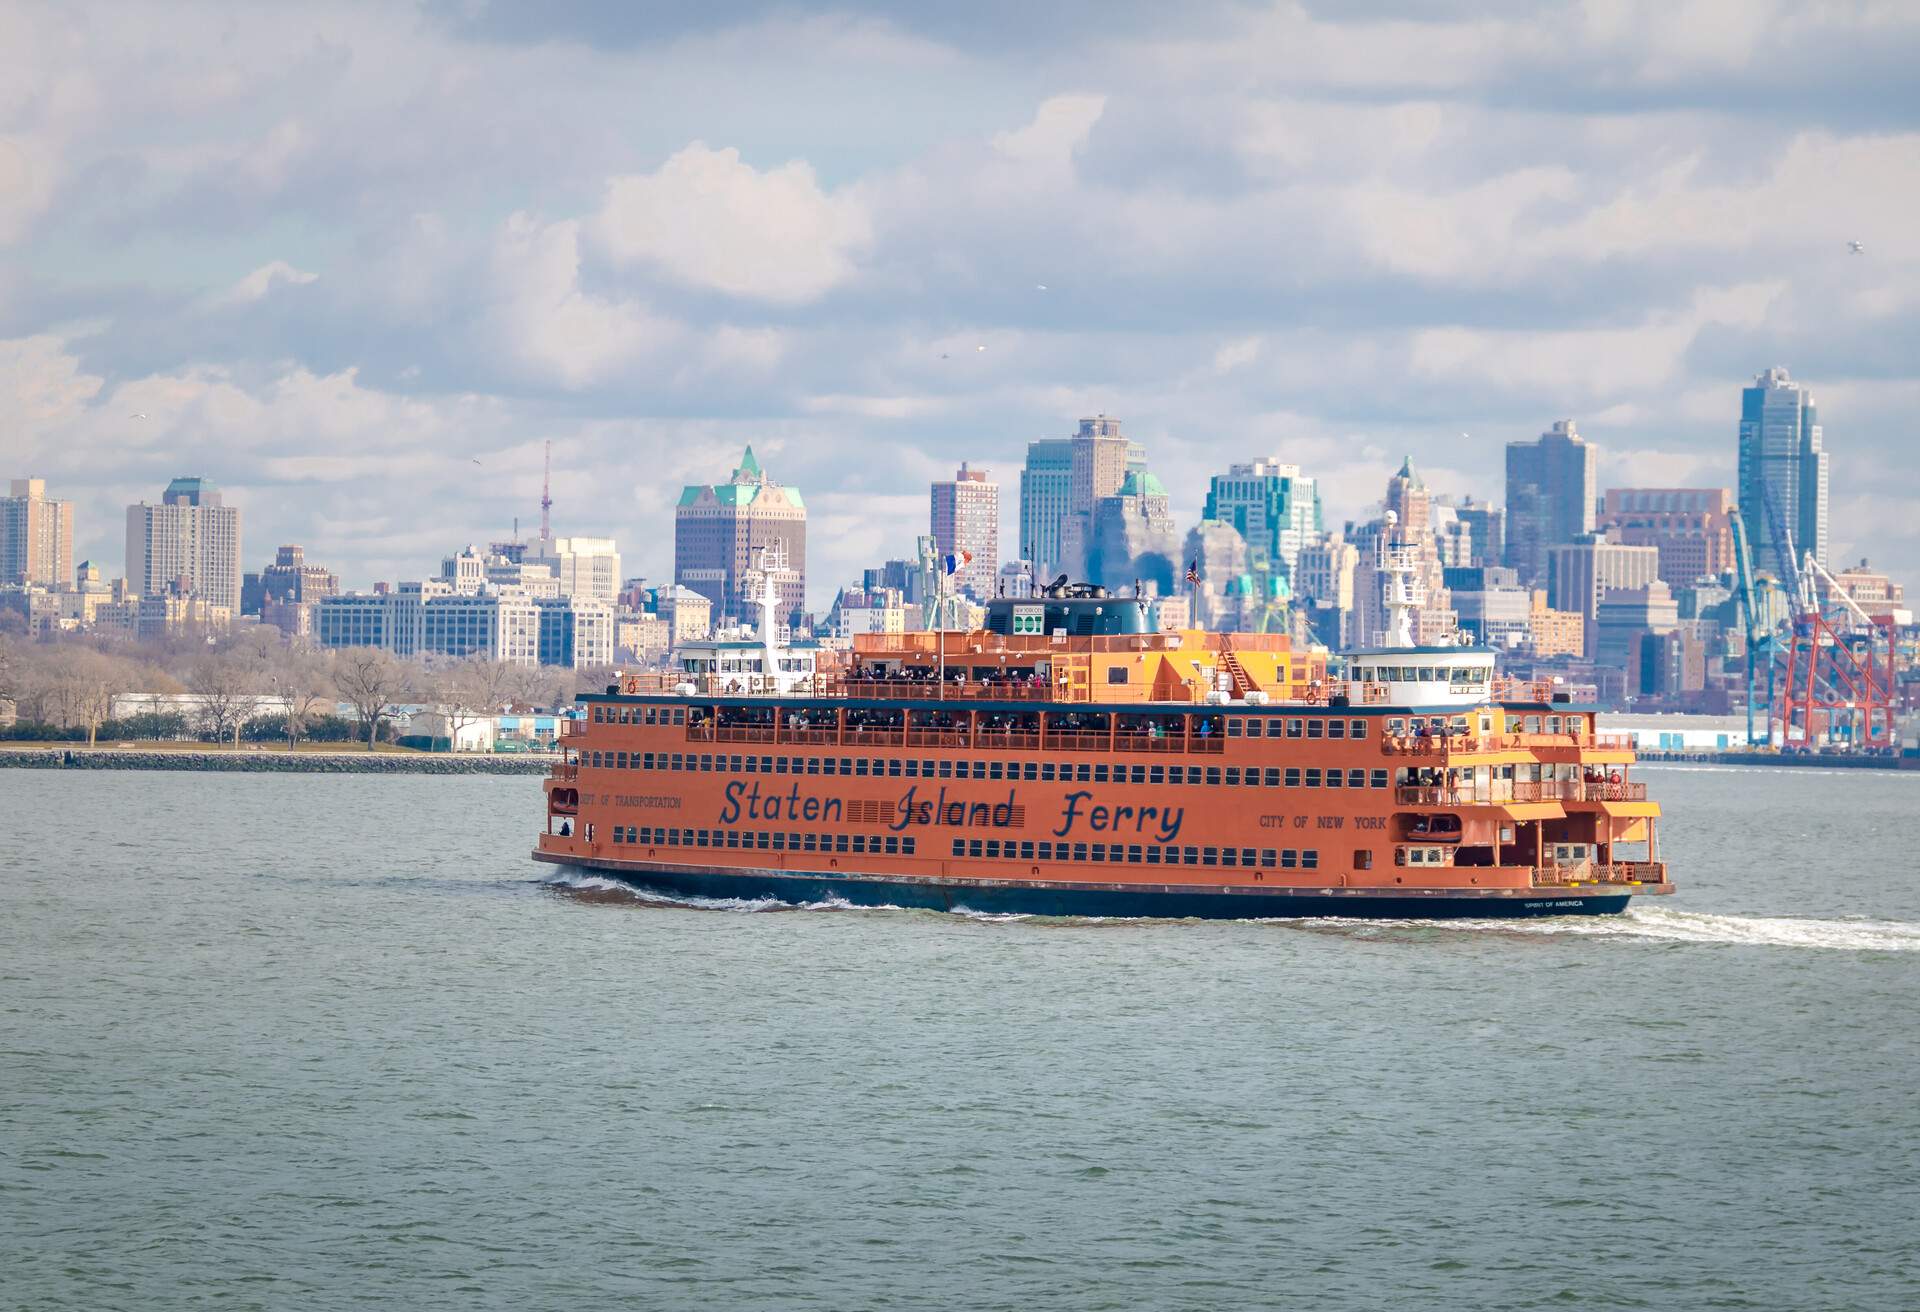 Staten Island Ferry and Lower Manhattan Skyline - New York, USA.; Shutterstock ID 587348906; Purchase Order: SF-06928905; Job: ; Client/Licensee: ; Other: